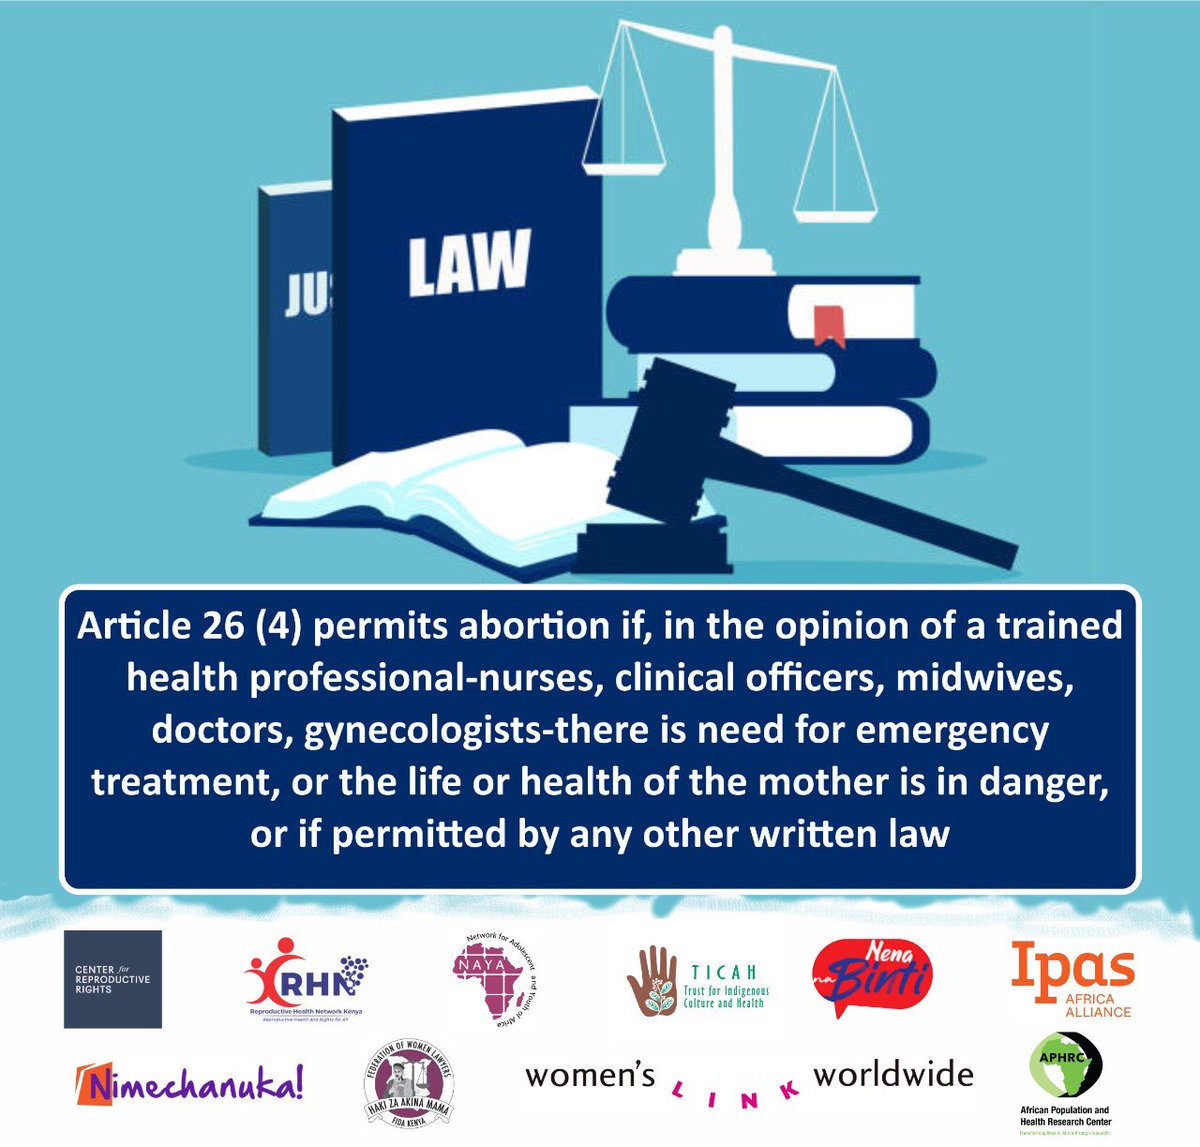 Abortion access is provided for under article 26 (4). Where abortion is not permitted unless in the opinion of a trained health professional,need for emergency treatment,or the life or health of the mother is in danger,or if permitted by any other written law. #DefendHerRightsKE